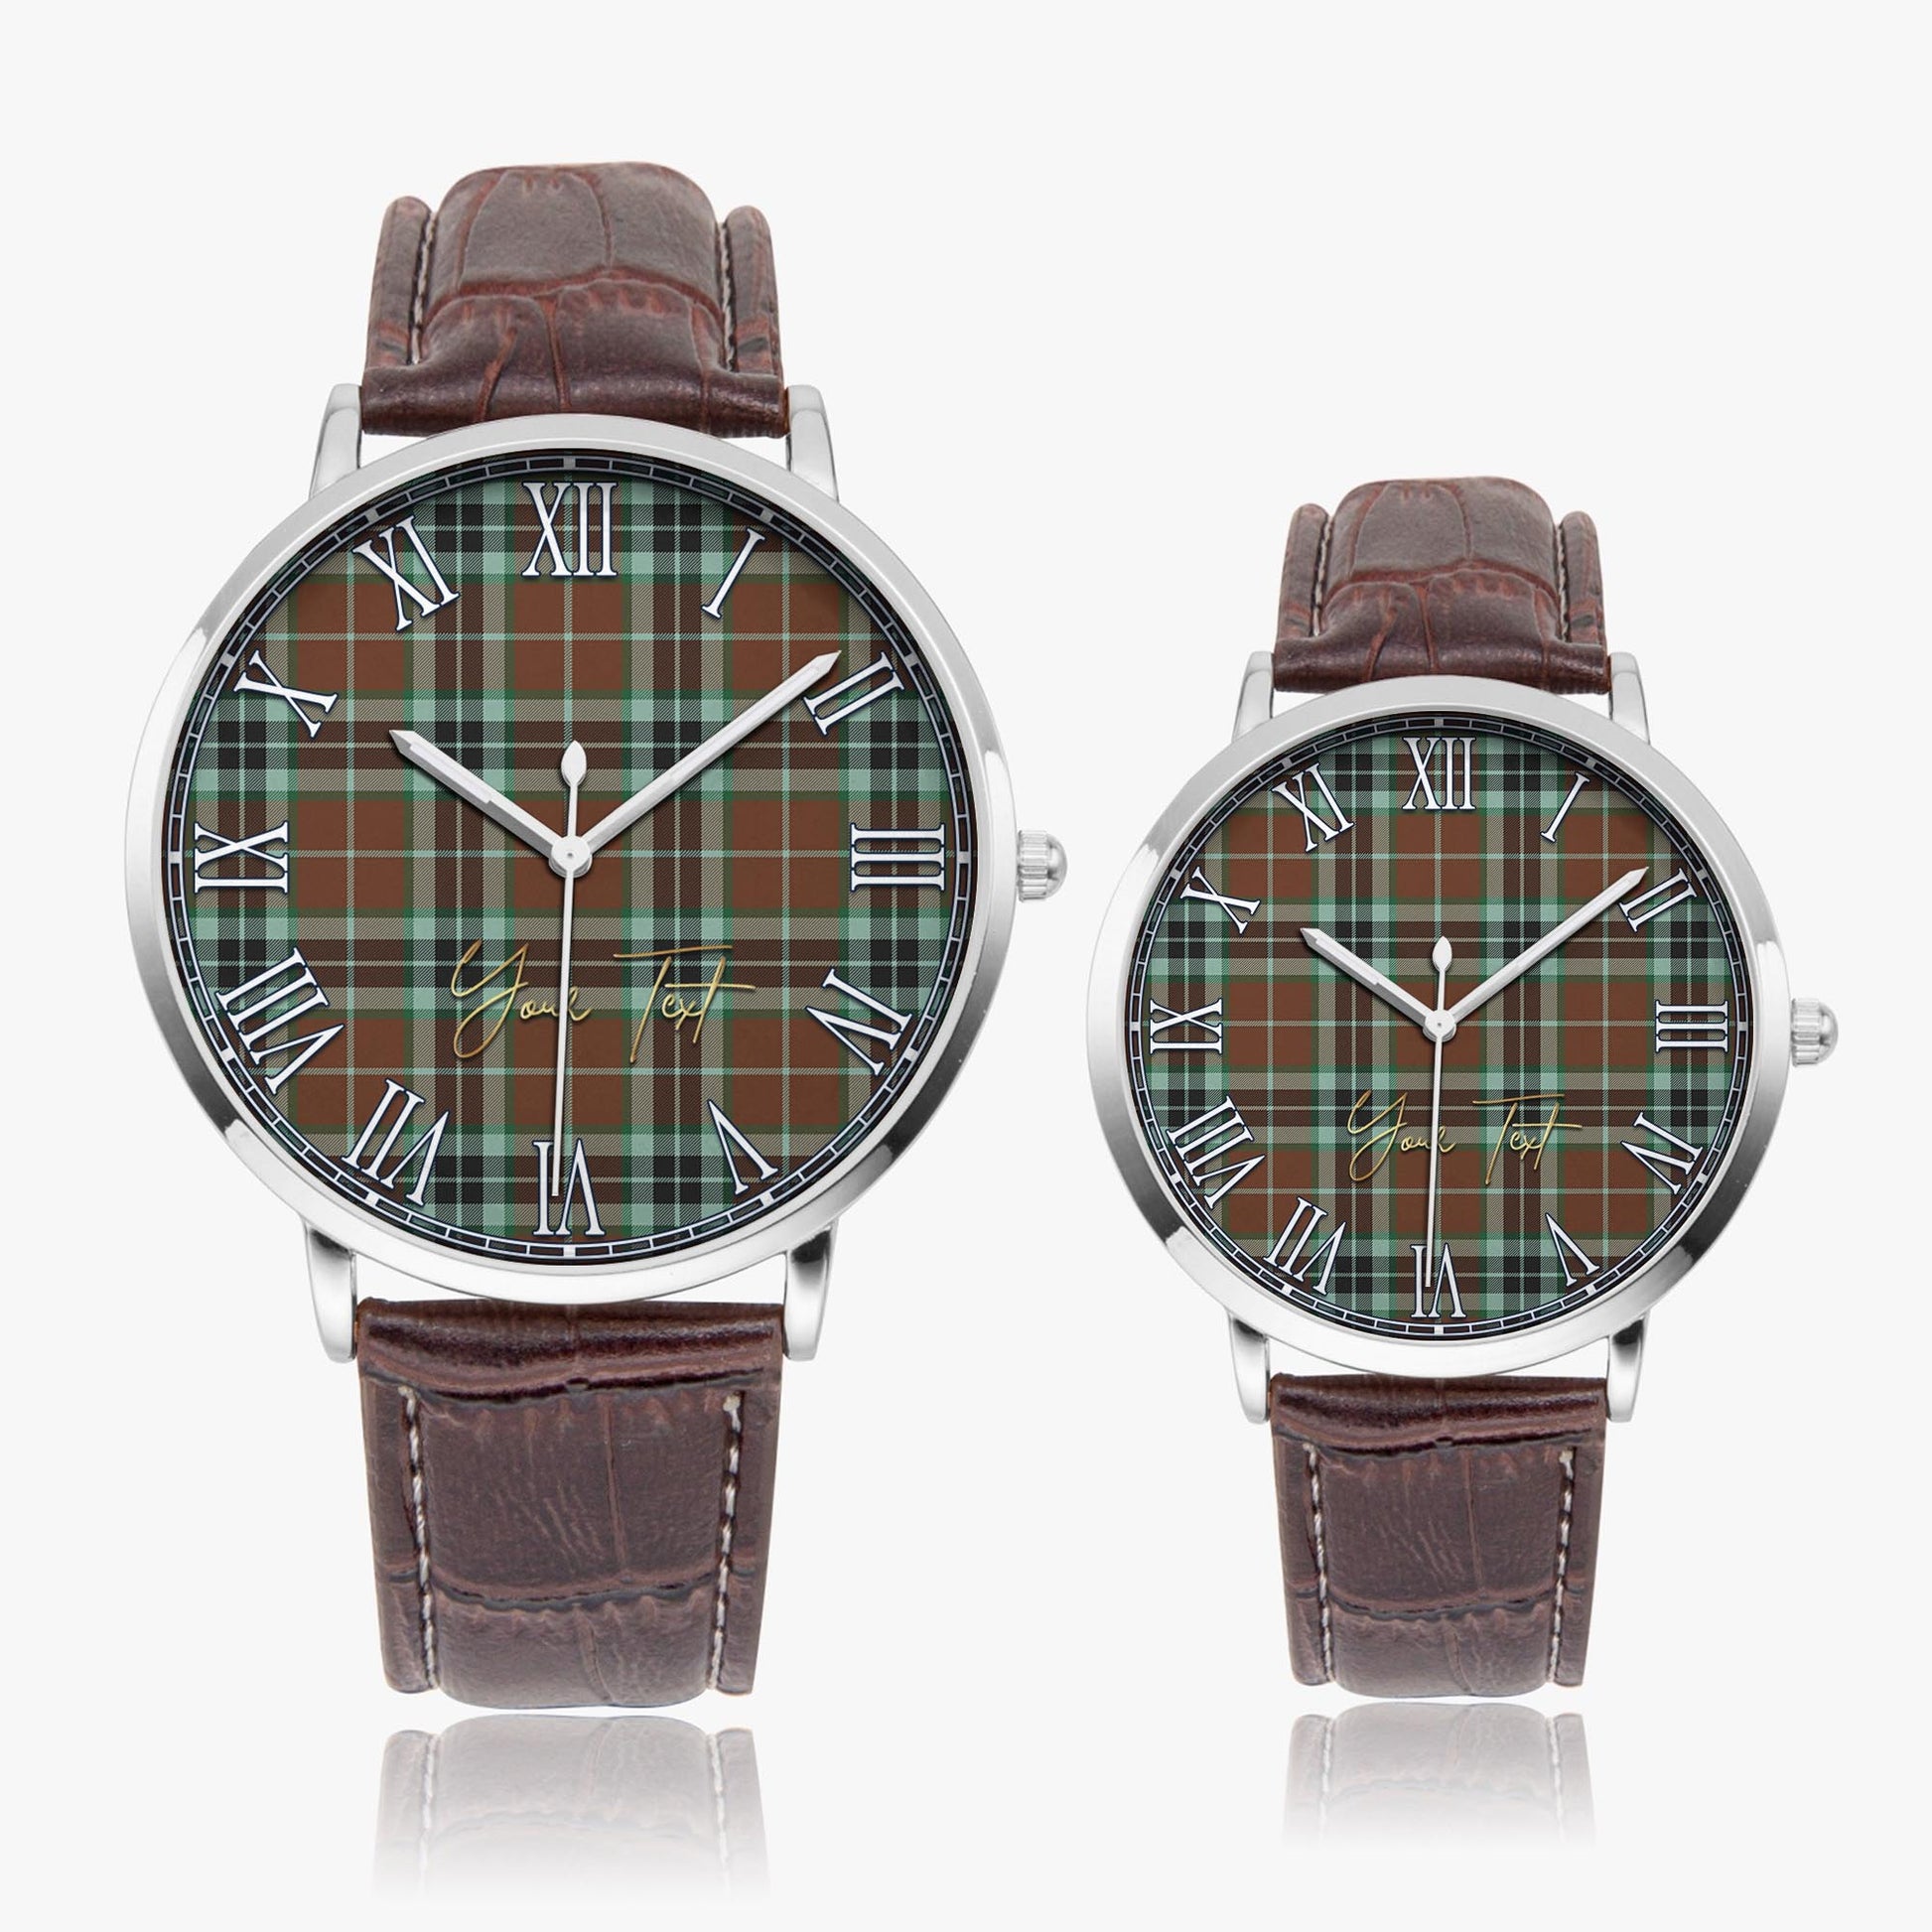 Thomson Hunting Modern Tartan Personalized Your Text Leather Trap Quartz Watch Ultra Thin Silver Case With Brown Leather Strap - Tartanvibesclothing Shop